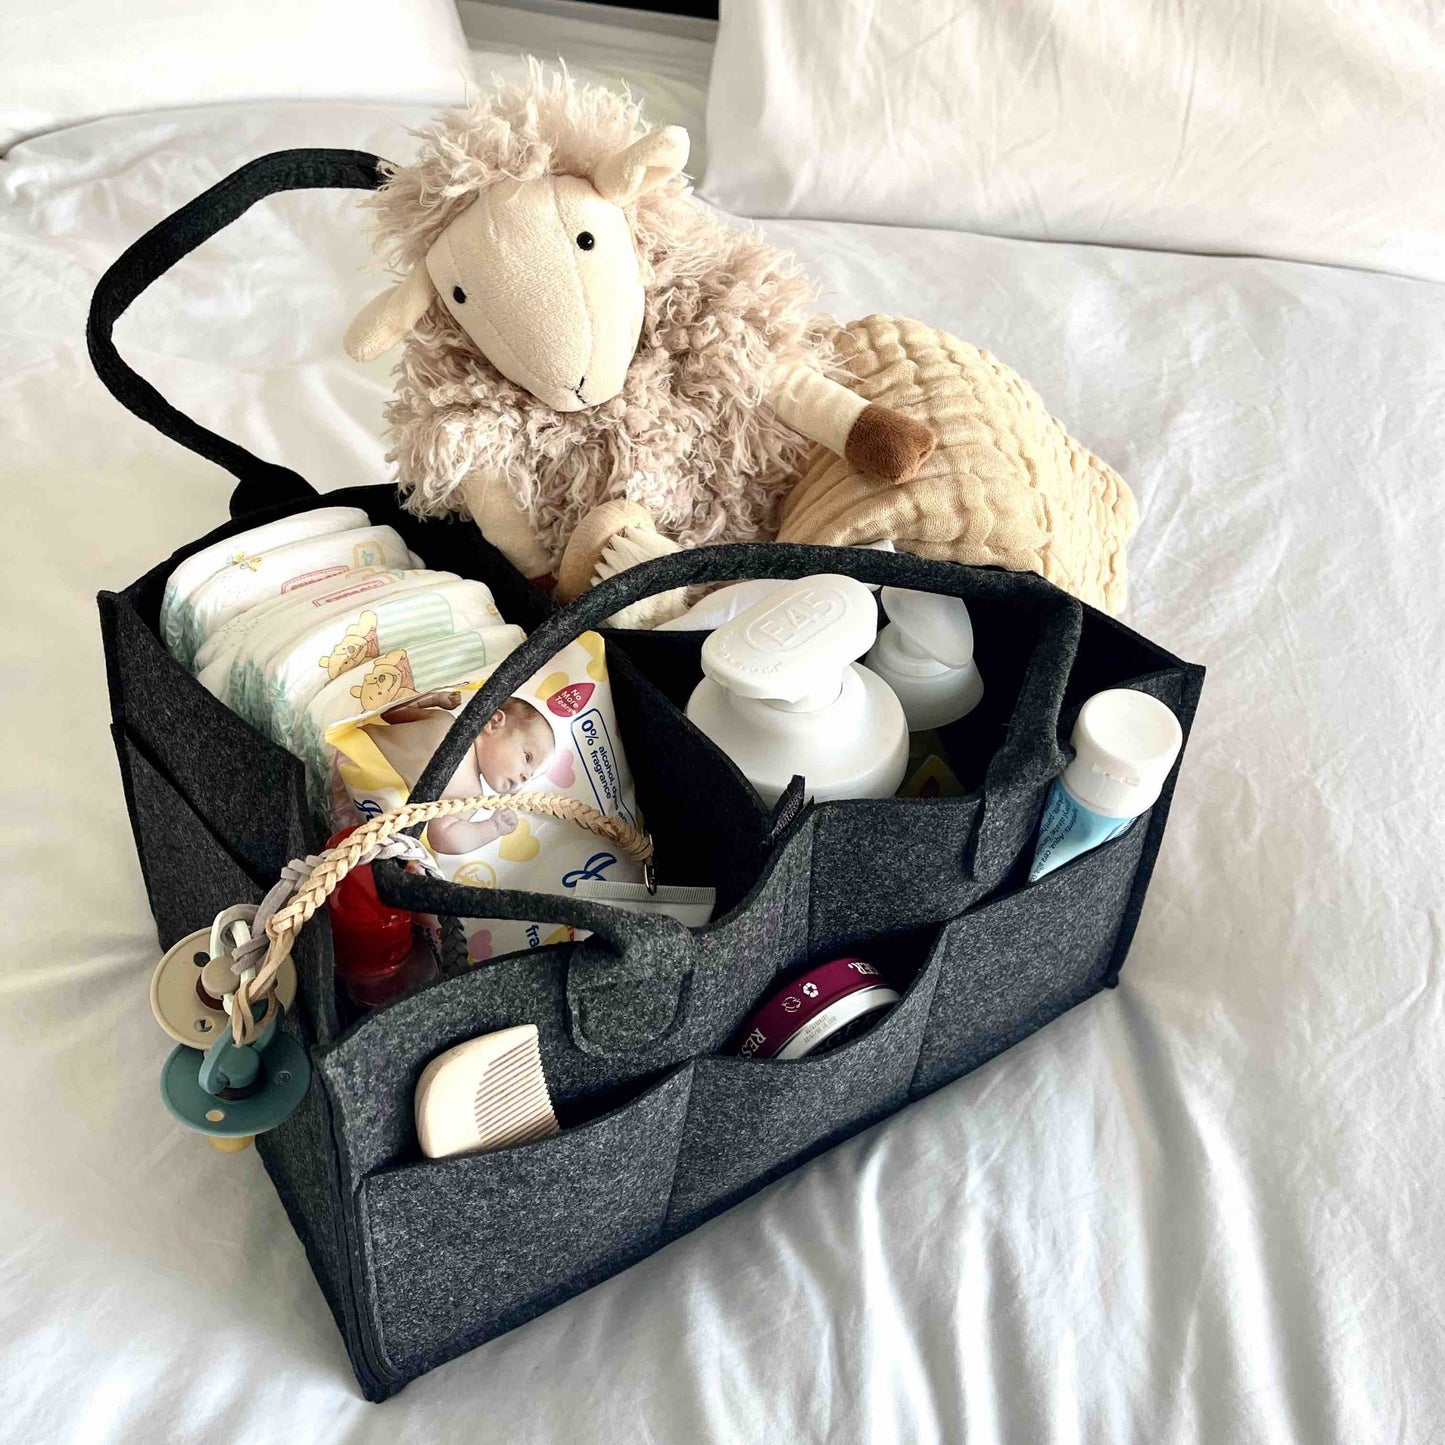 Nappy Caddy/Organiser - Dark Grey with Faux Leather Handles